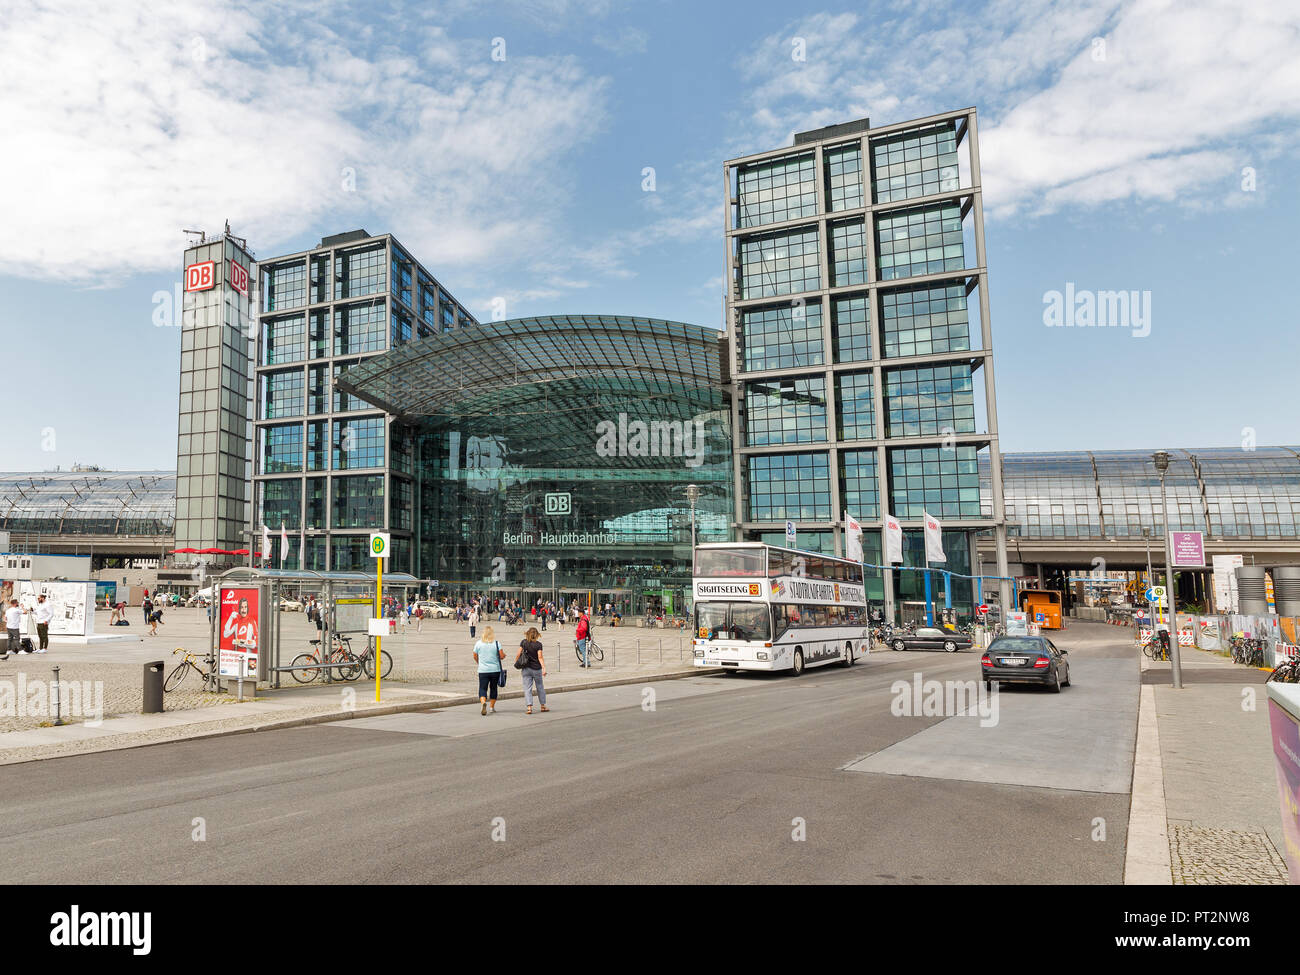 BERLIN, GERMANY - JULY 13, 2018: Facade view of Berlin Central Railway Station square or Berlin Hauptbahnhof, Hbf. Station was opened in May 2006, ope Stock Photo